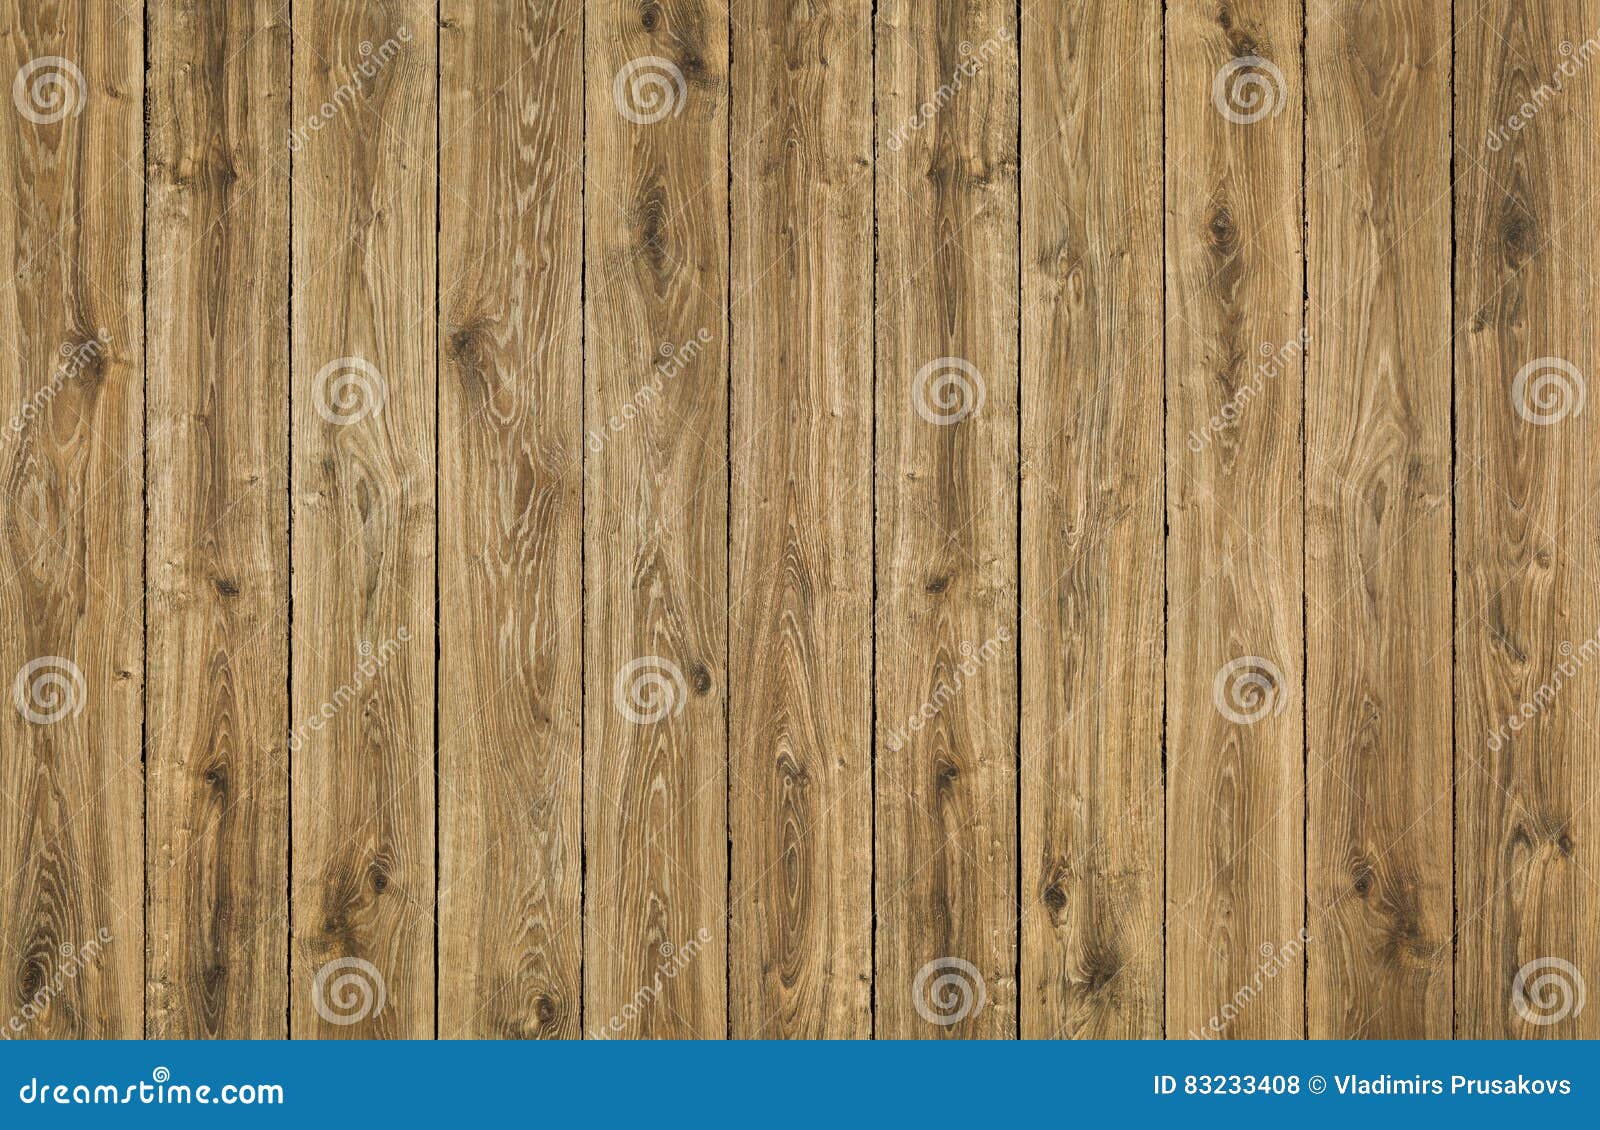 wood texture planks background, brown wooden fence, oak plank